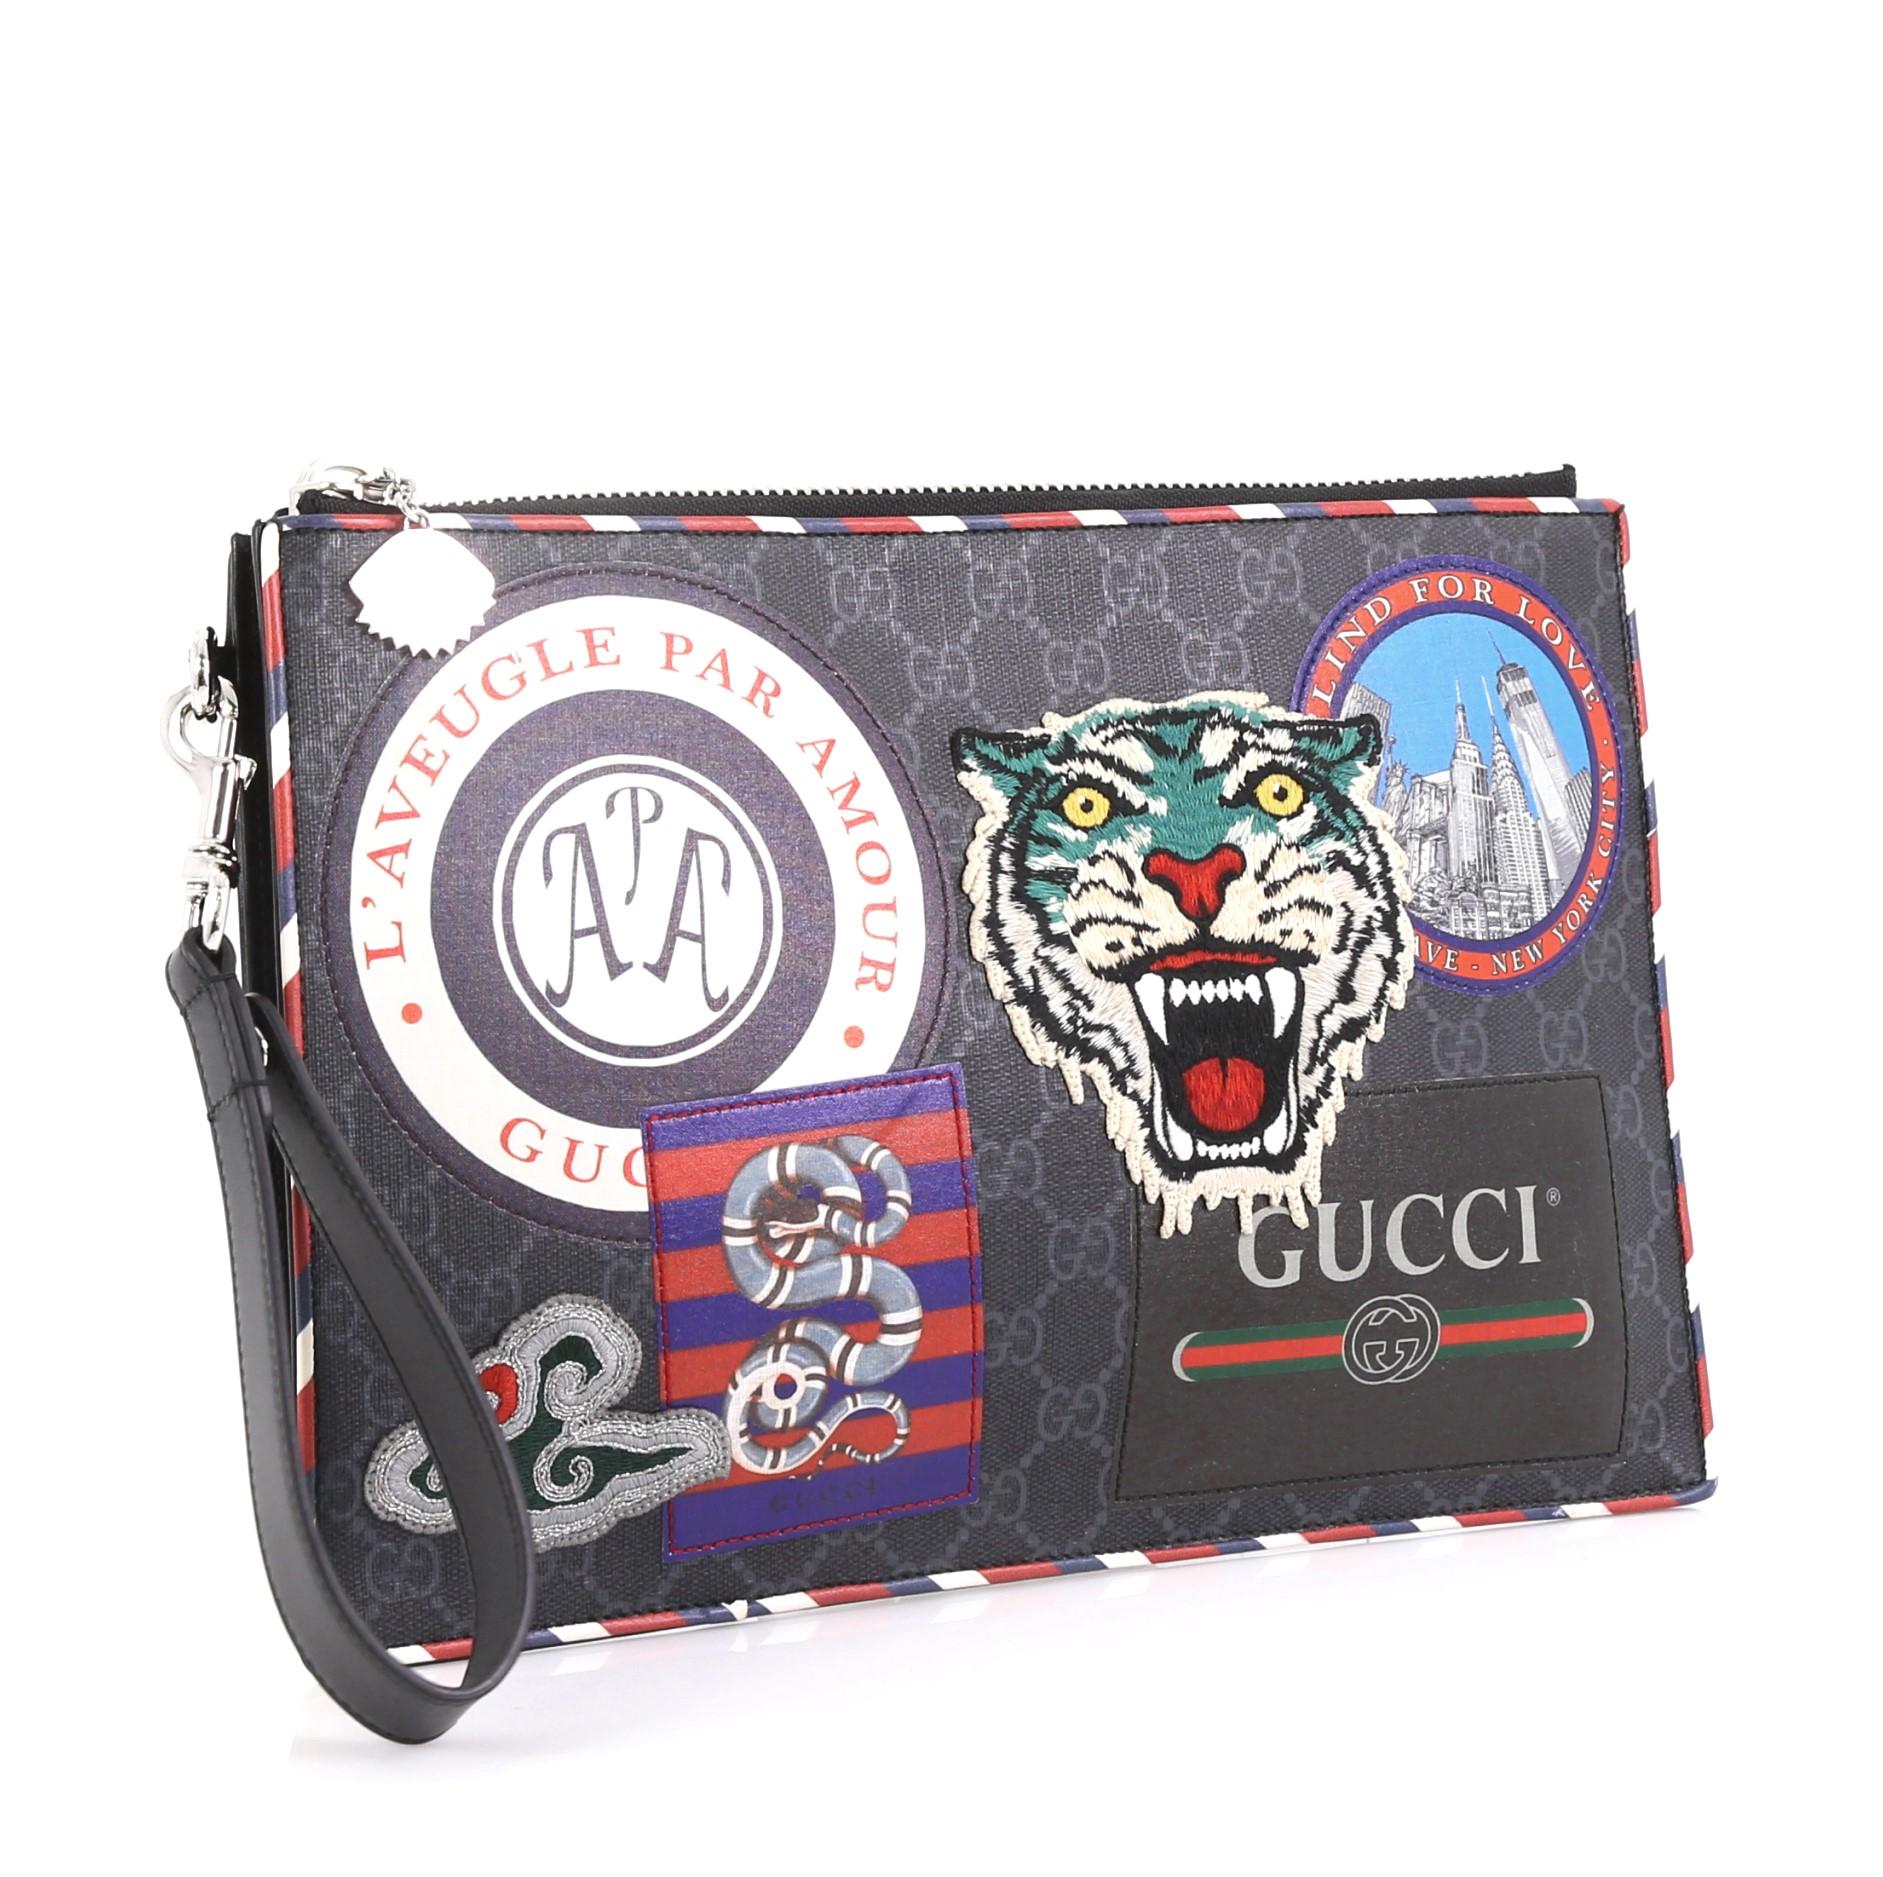 This Gucci Night Courrier Pouch GG Coated Canvas with Applique, crafted from blue GG coated canvas and leather with applique, features leather wrist strap and silver-tone hardware. Its zip closure opens to a black fabric interior with multiple card